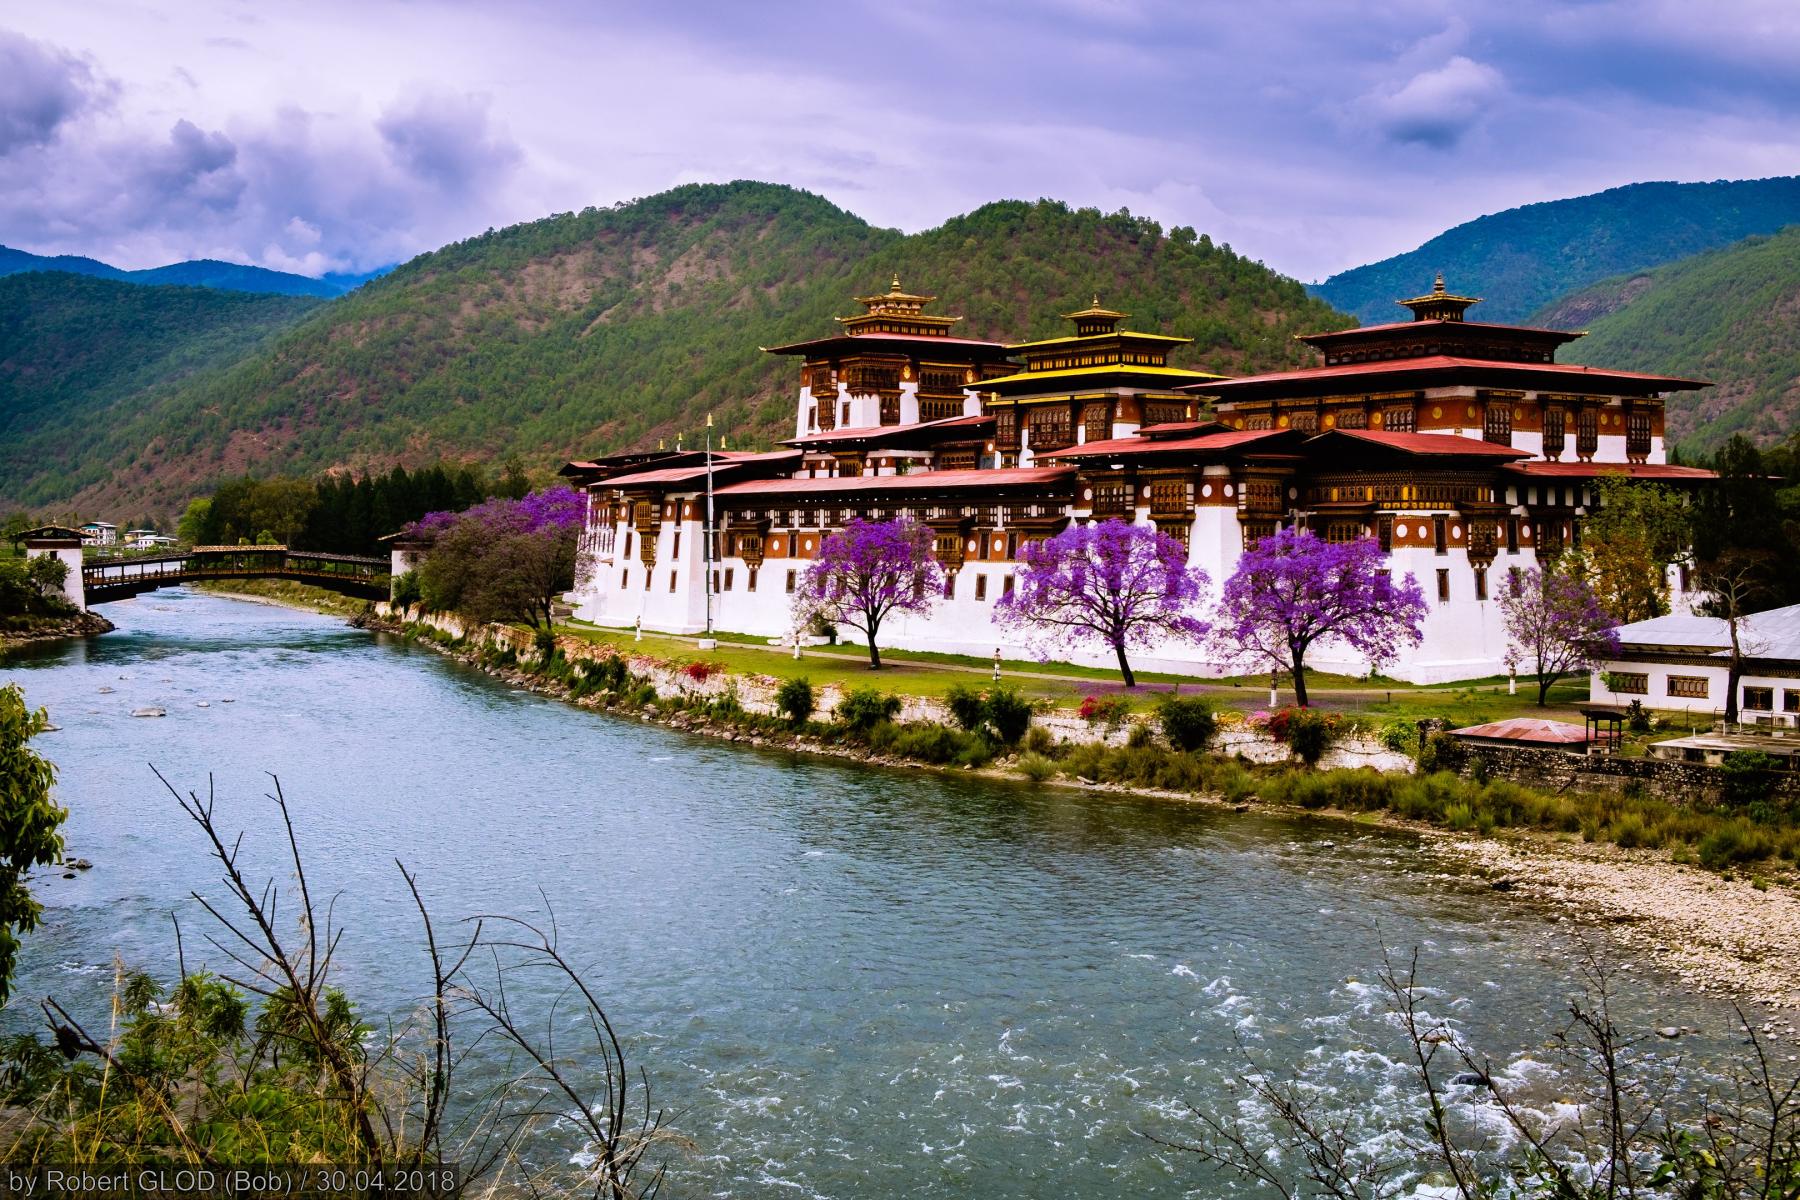 Bhutan: The Land of Prosperity and Happiness